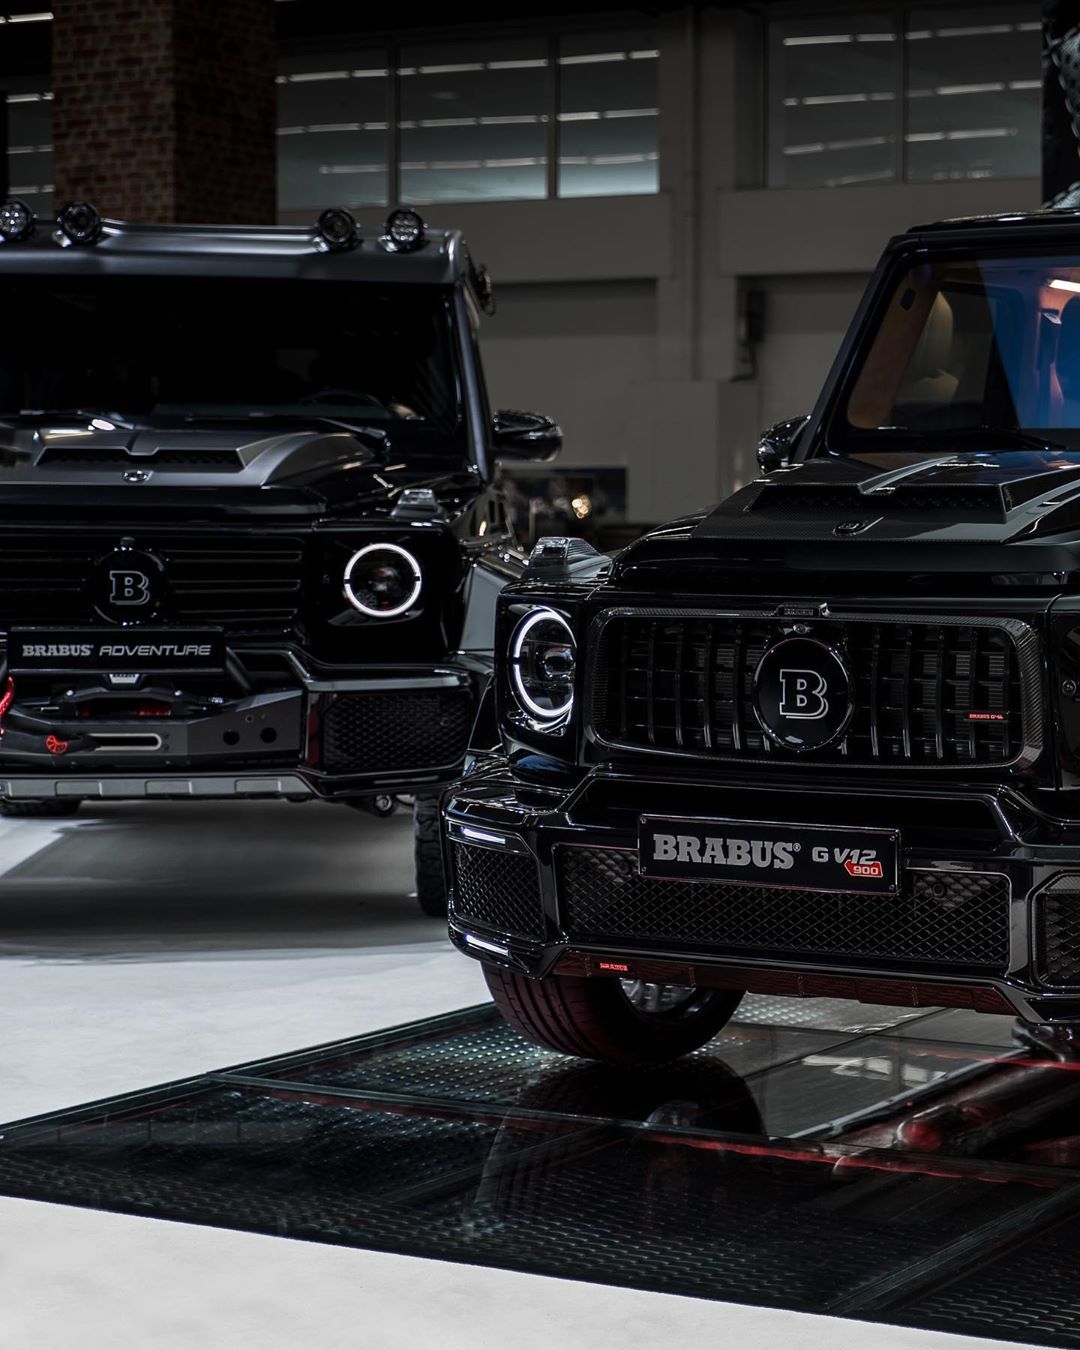 BRABUS 900 G V12. 1 of 10 worldwide! ⠀ The world's most powerful V12 SUV 900 hp / 662 kW, 1500 Nm, 0 km/. G class, Mercedes benz g class, Mercedes benz cars